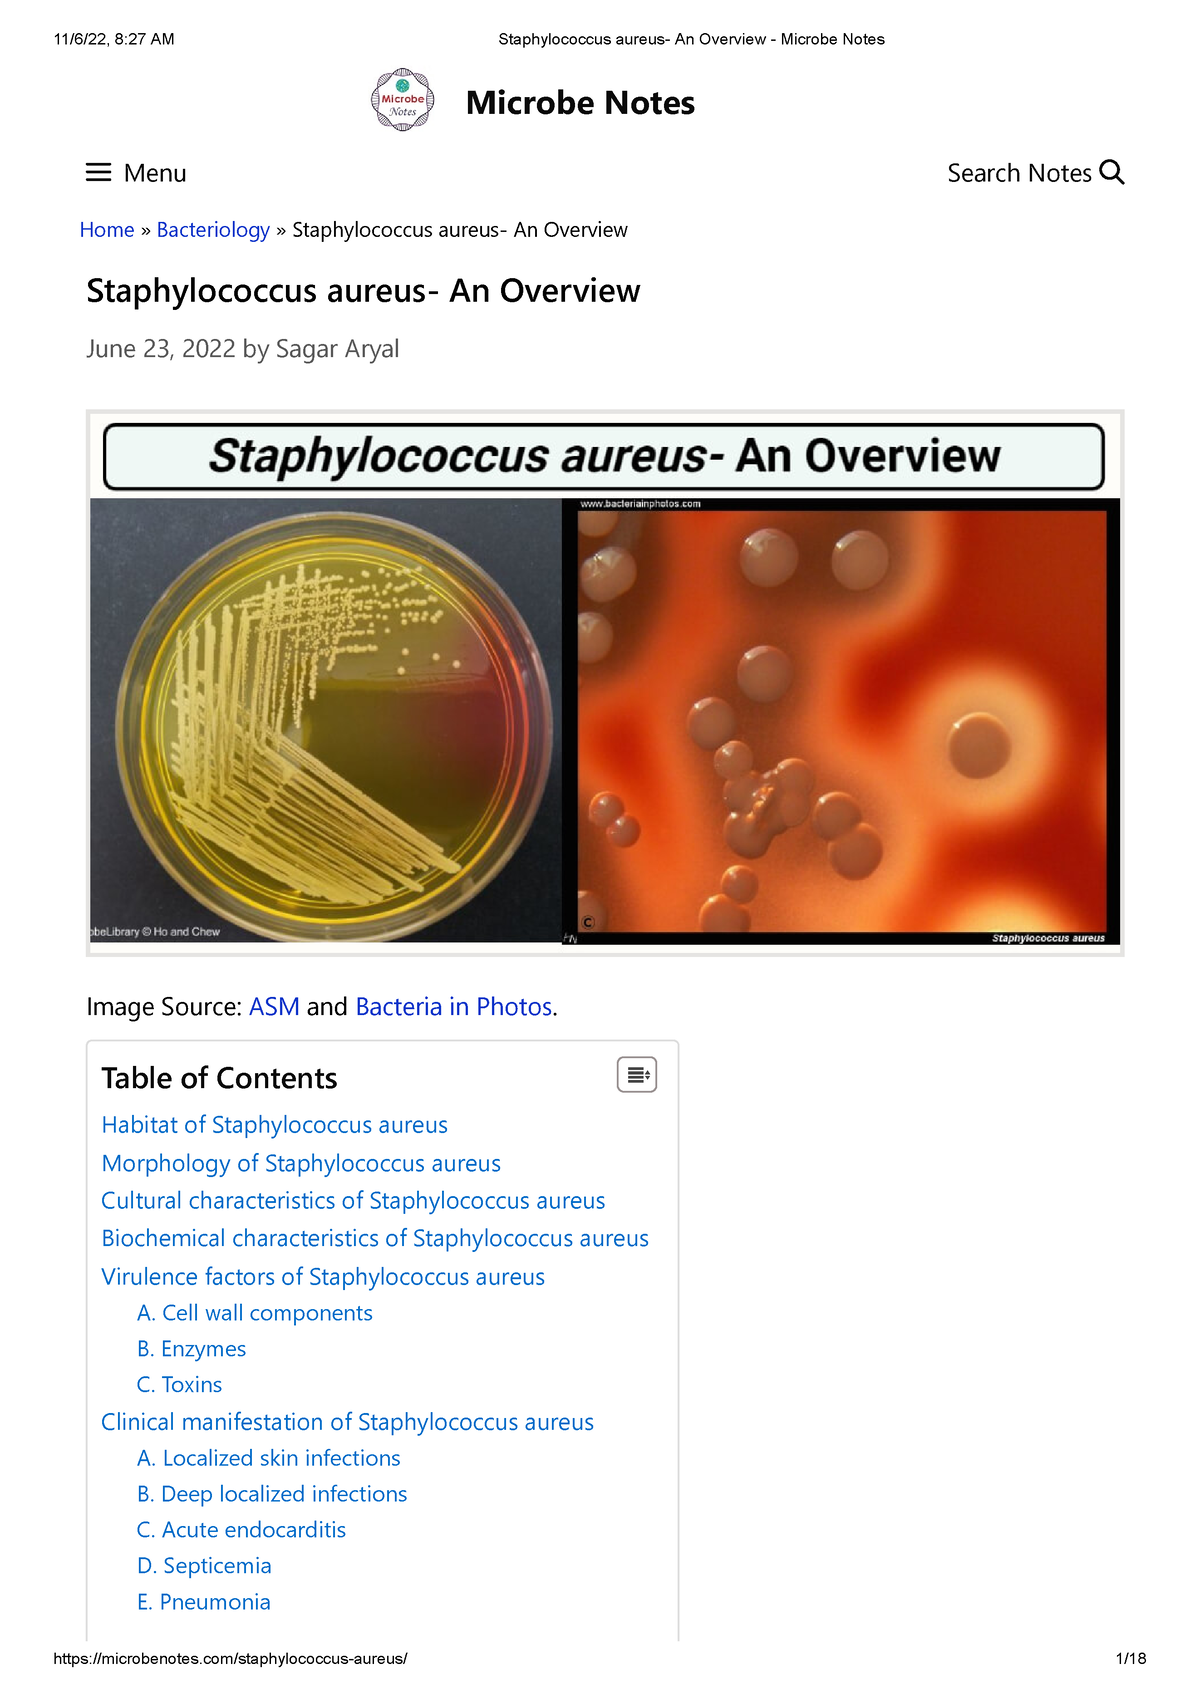 Staphylococcus aureus- An Overview - Microbe Notes